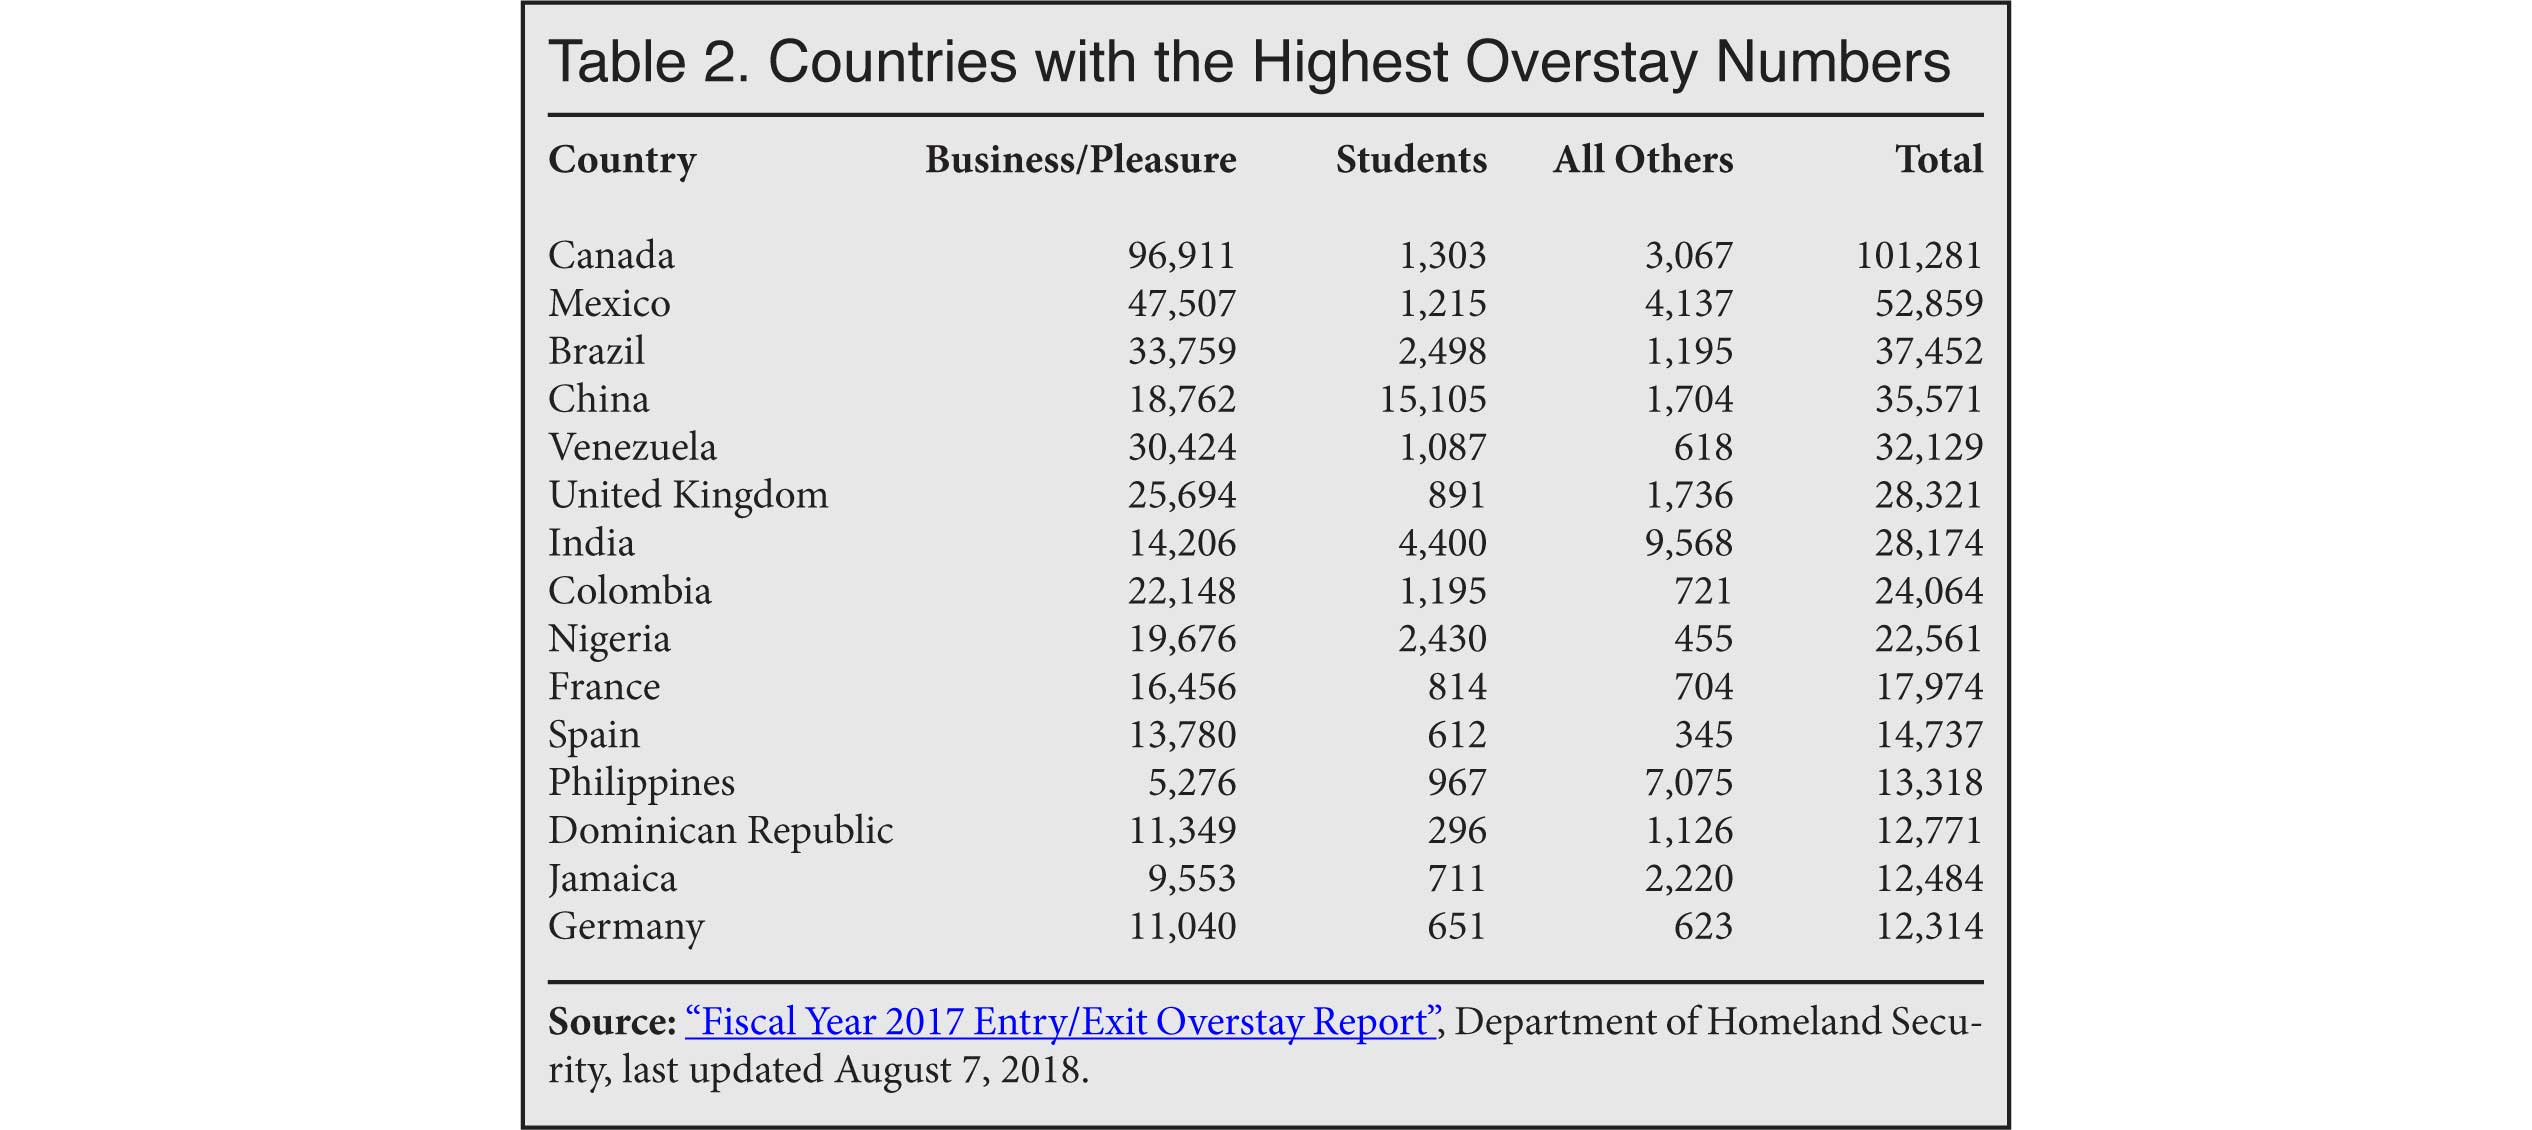 Table: Countries with the Highest Overstay Numbers, 2017